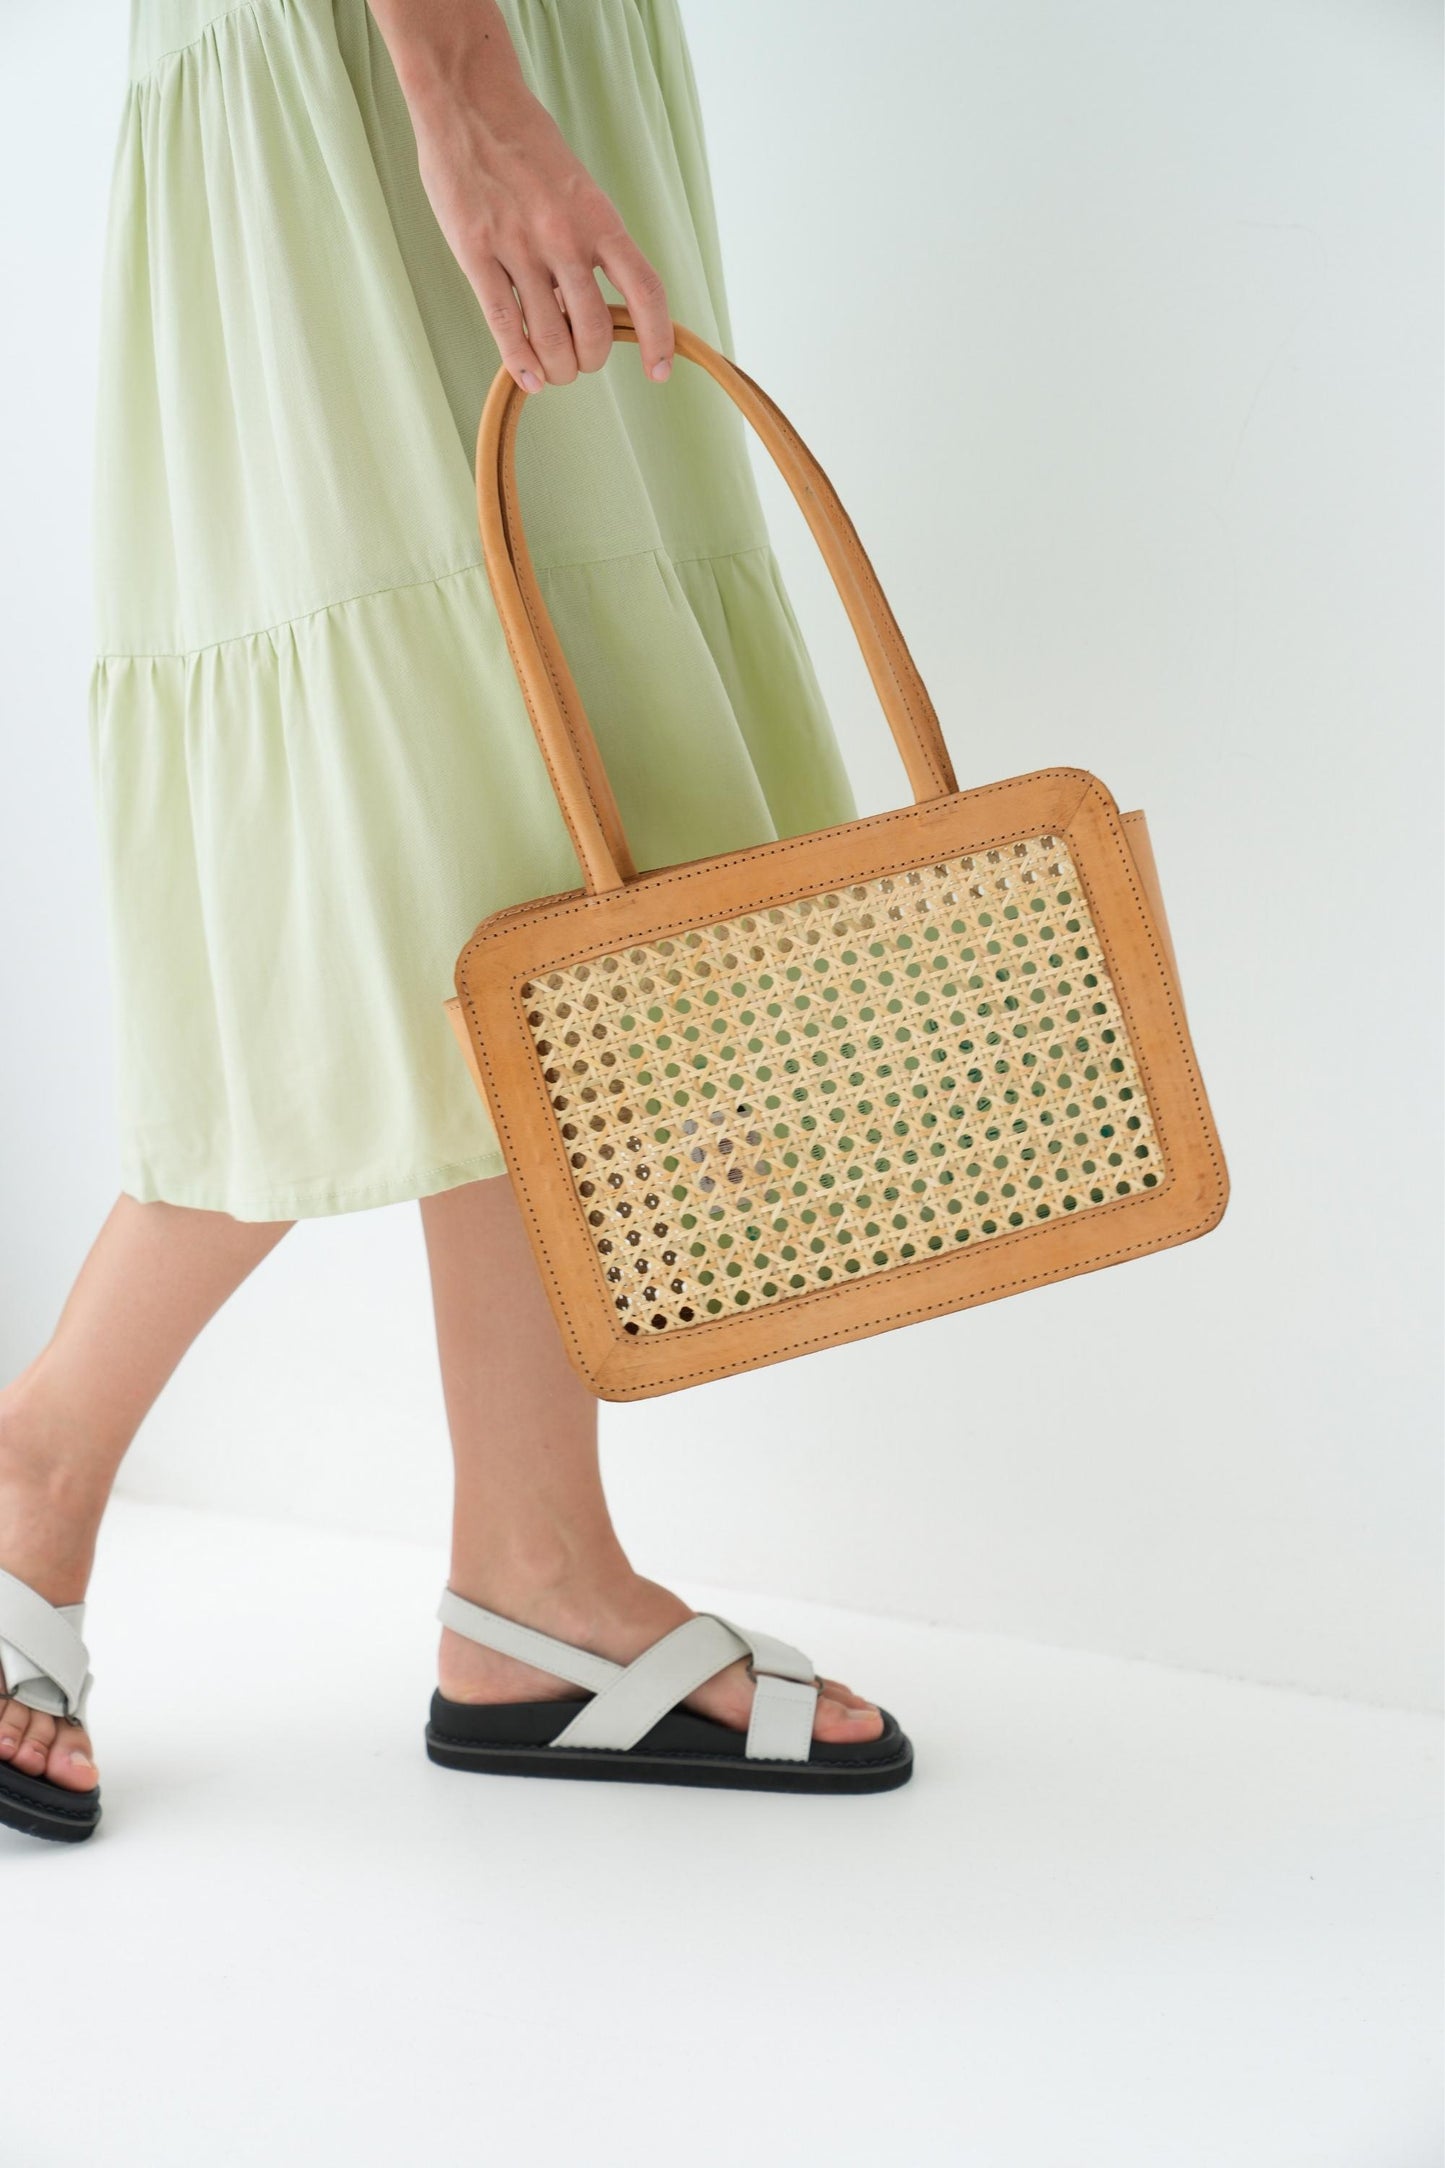 Sydney Handmade Cane Woven and Leather Tote